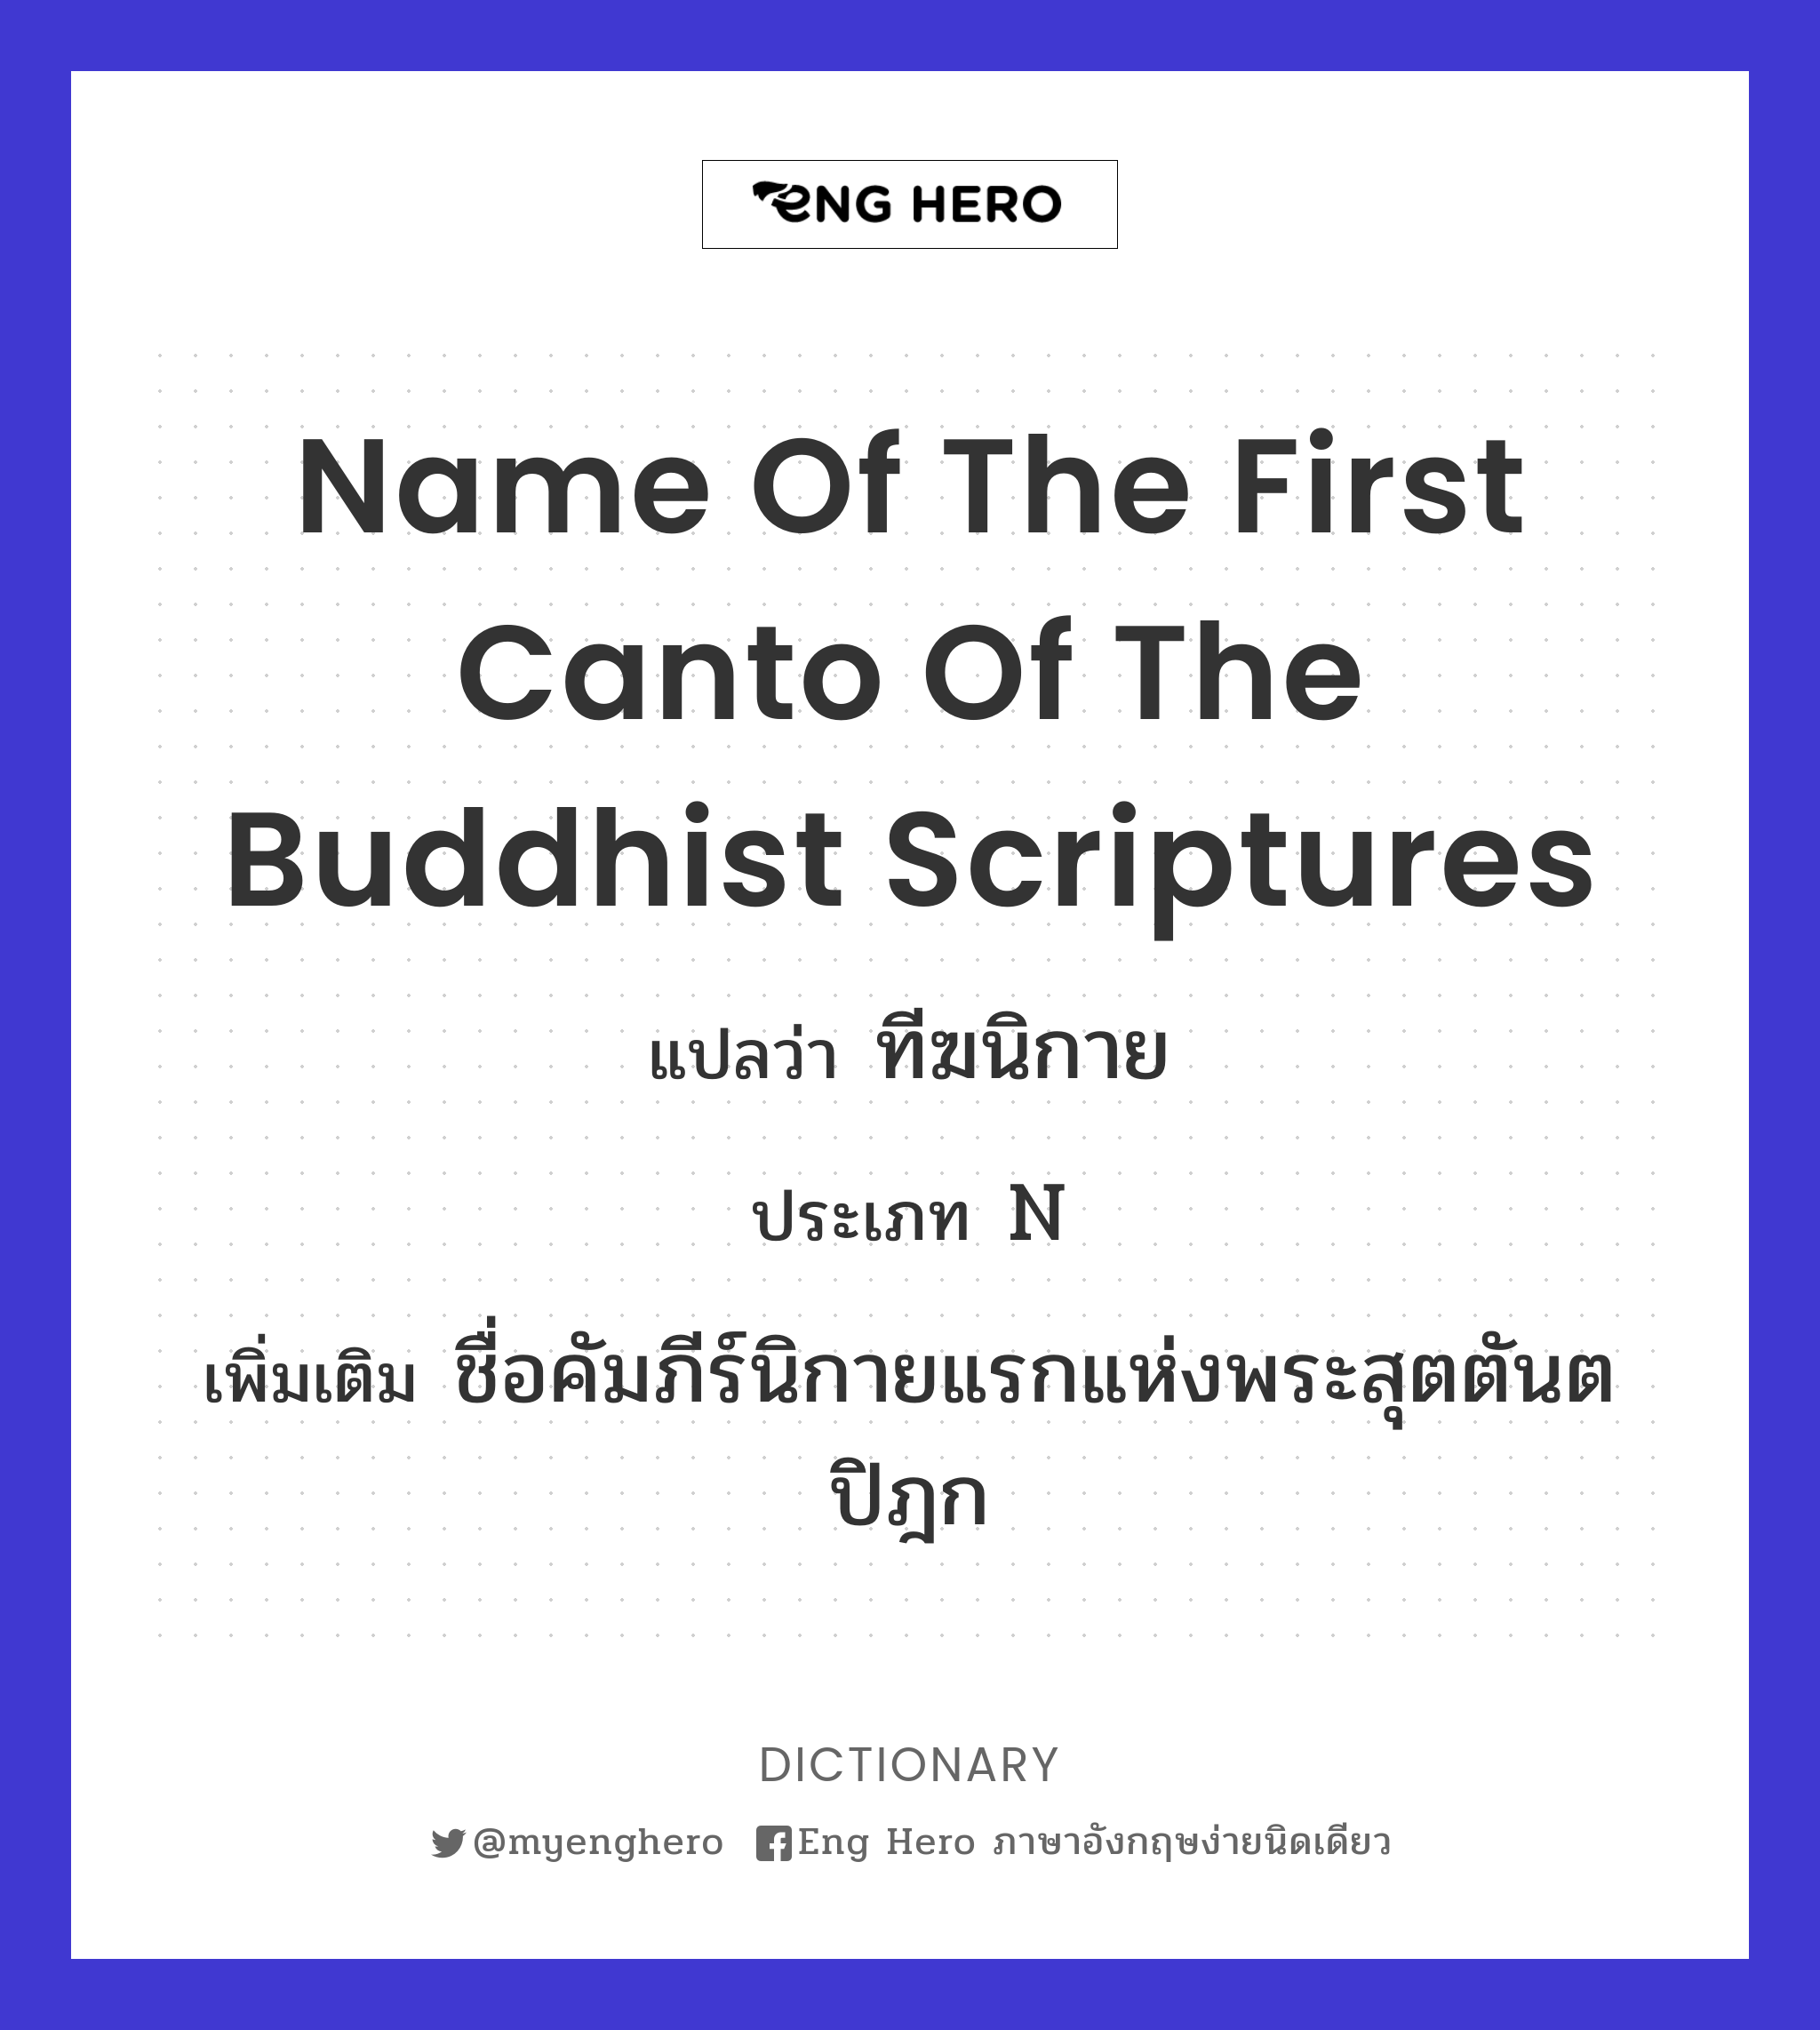 name of the first canto of the Buddhist scriptures